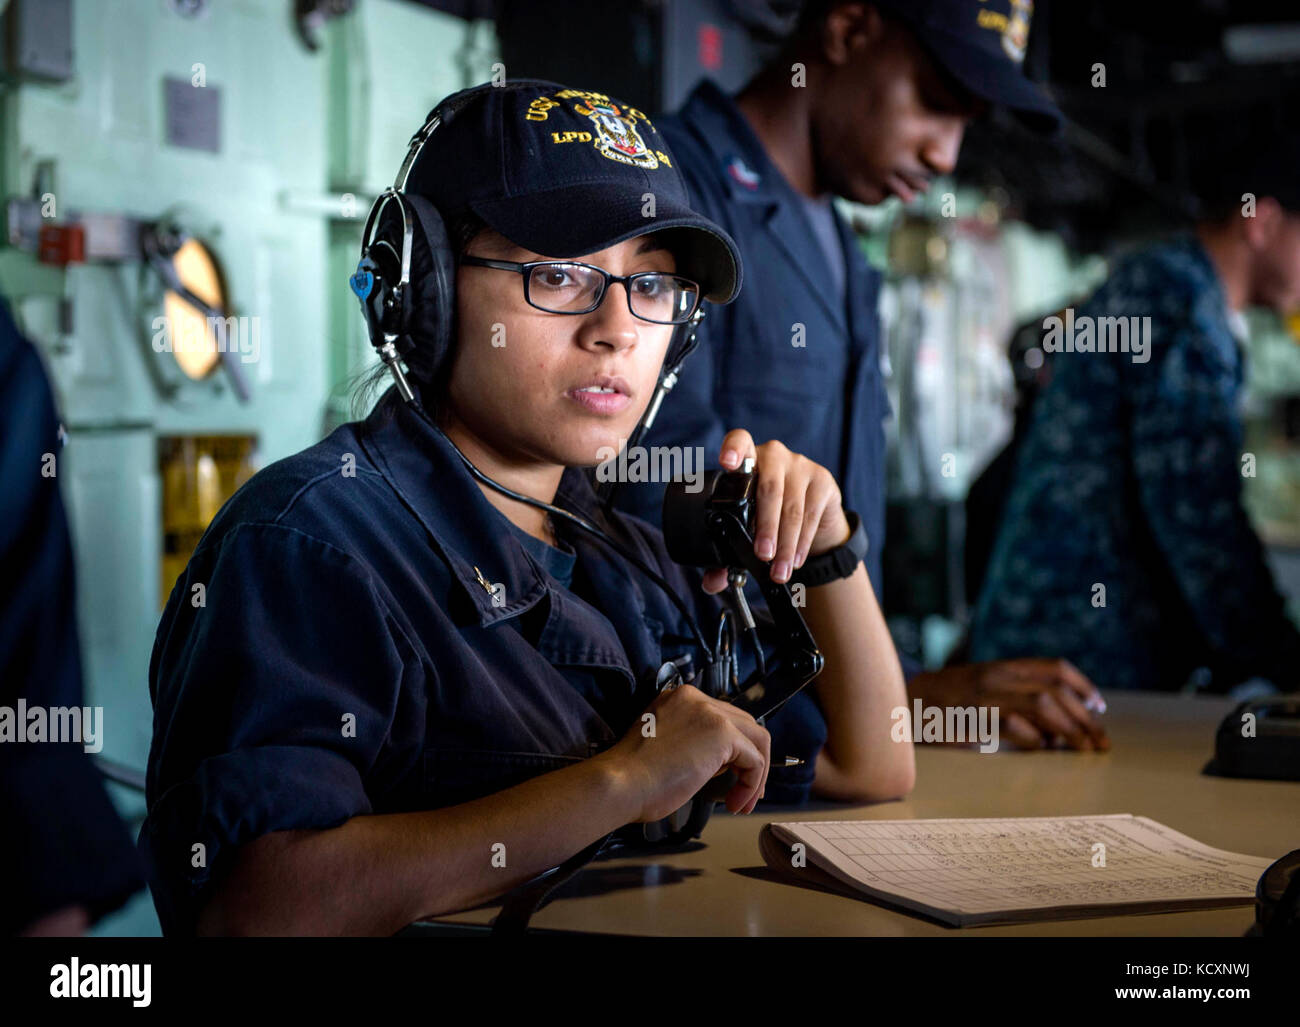 171007-N-YL073-0133   MAYPORT, Fla., (Oct. 7, 2017) Quartermaster 3rd Class Mary Hinojosa, a native of San Antonio, communicates with bearing takers on the bridge aboard the amphibious transport dock ship USS New York (LPD 21) during sea and anchor evolutions.  New York departed Naval Station Mayport, Florida, to support the Gulf coast region in the event assistance is needed in the wake of Hurricane Nate. (U.S. Navy photo by Mass Communication Specialist 1st Class Shamira Purifoy/Released) Stock Photo